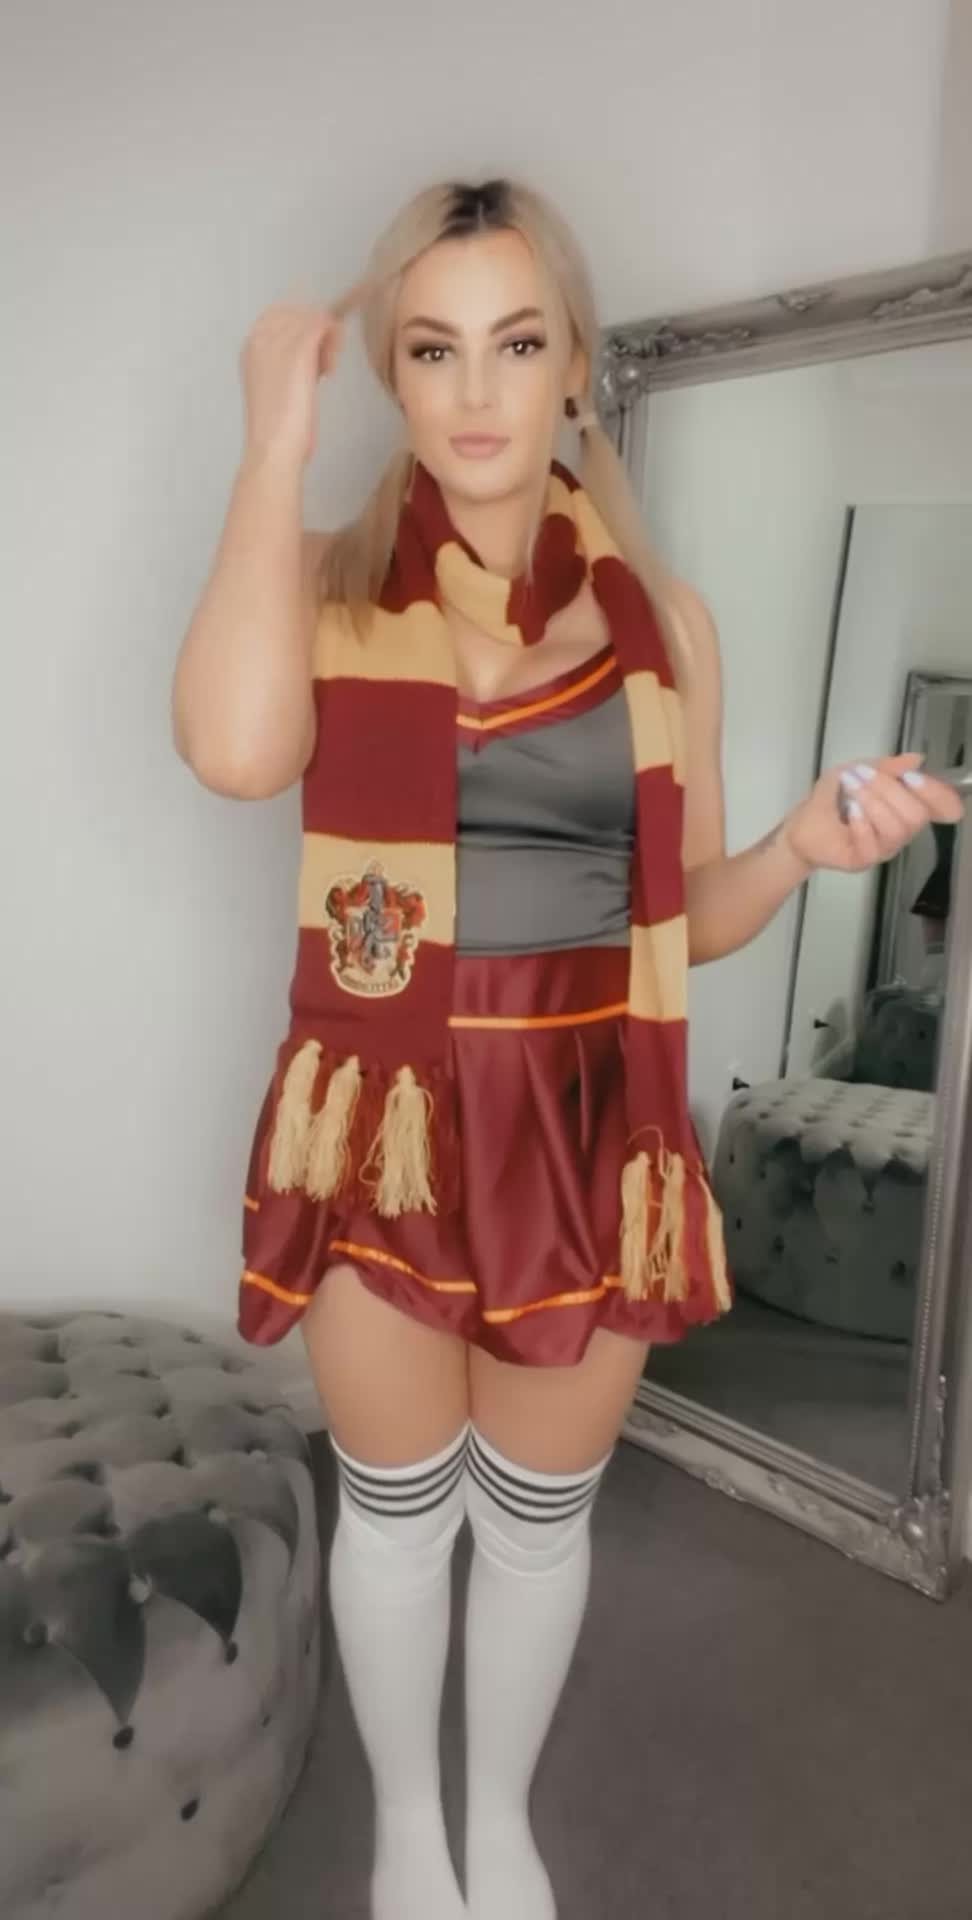 Shared Video by JohnSmith1876 with the username @Johnsmith1876,  July 2, 2021 at 2:25 PM. The post is about the topic Sexy Cosplay